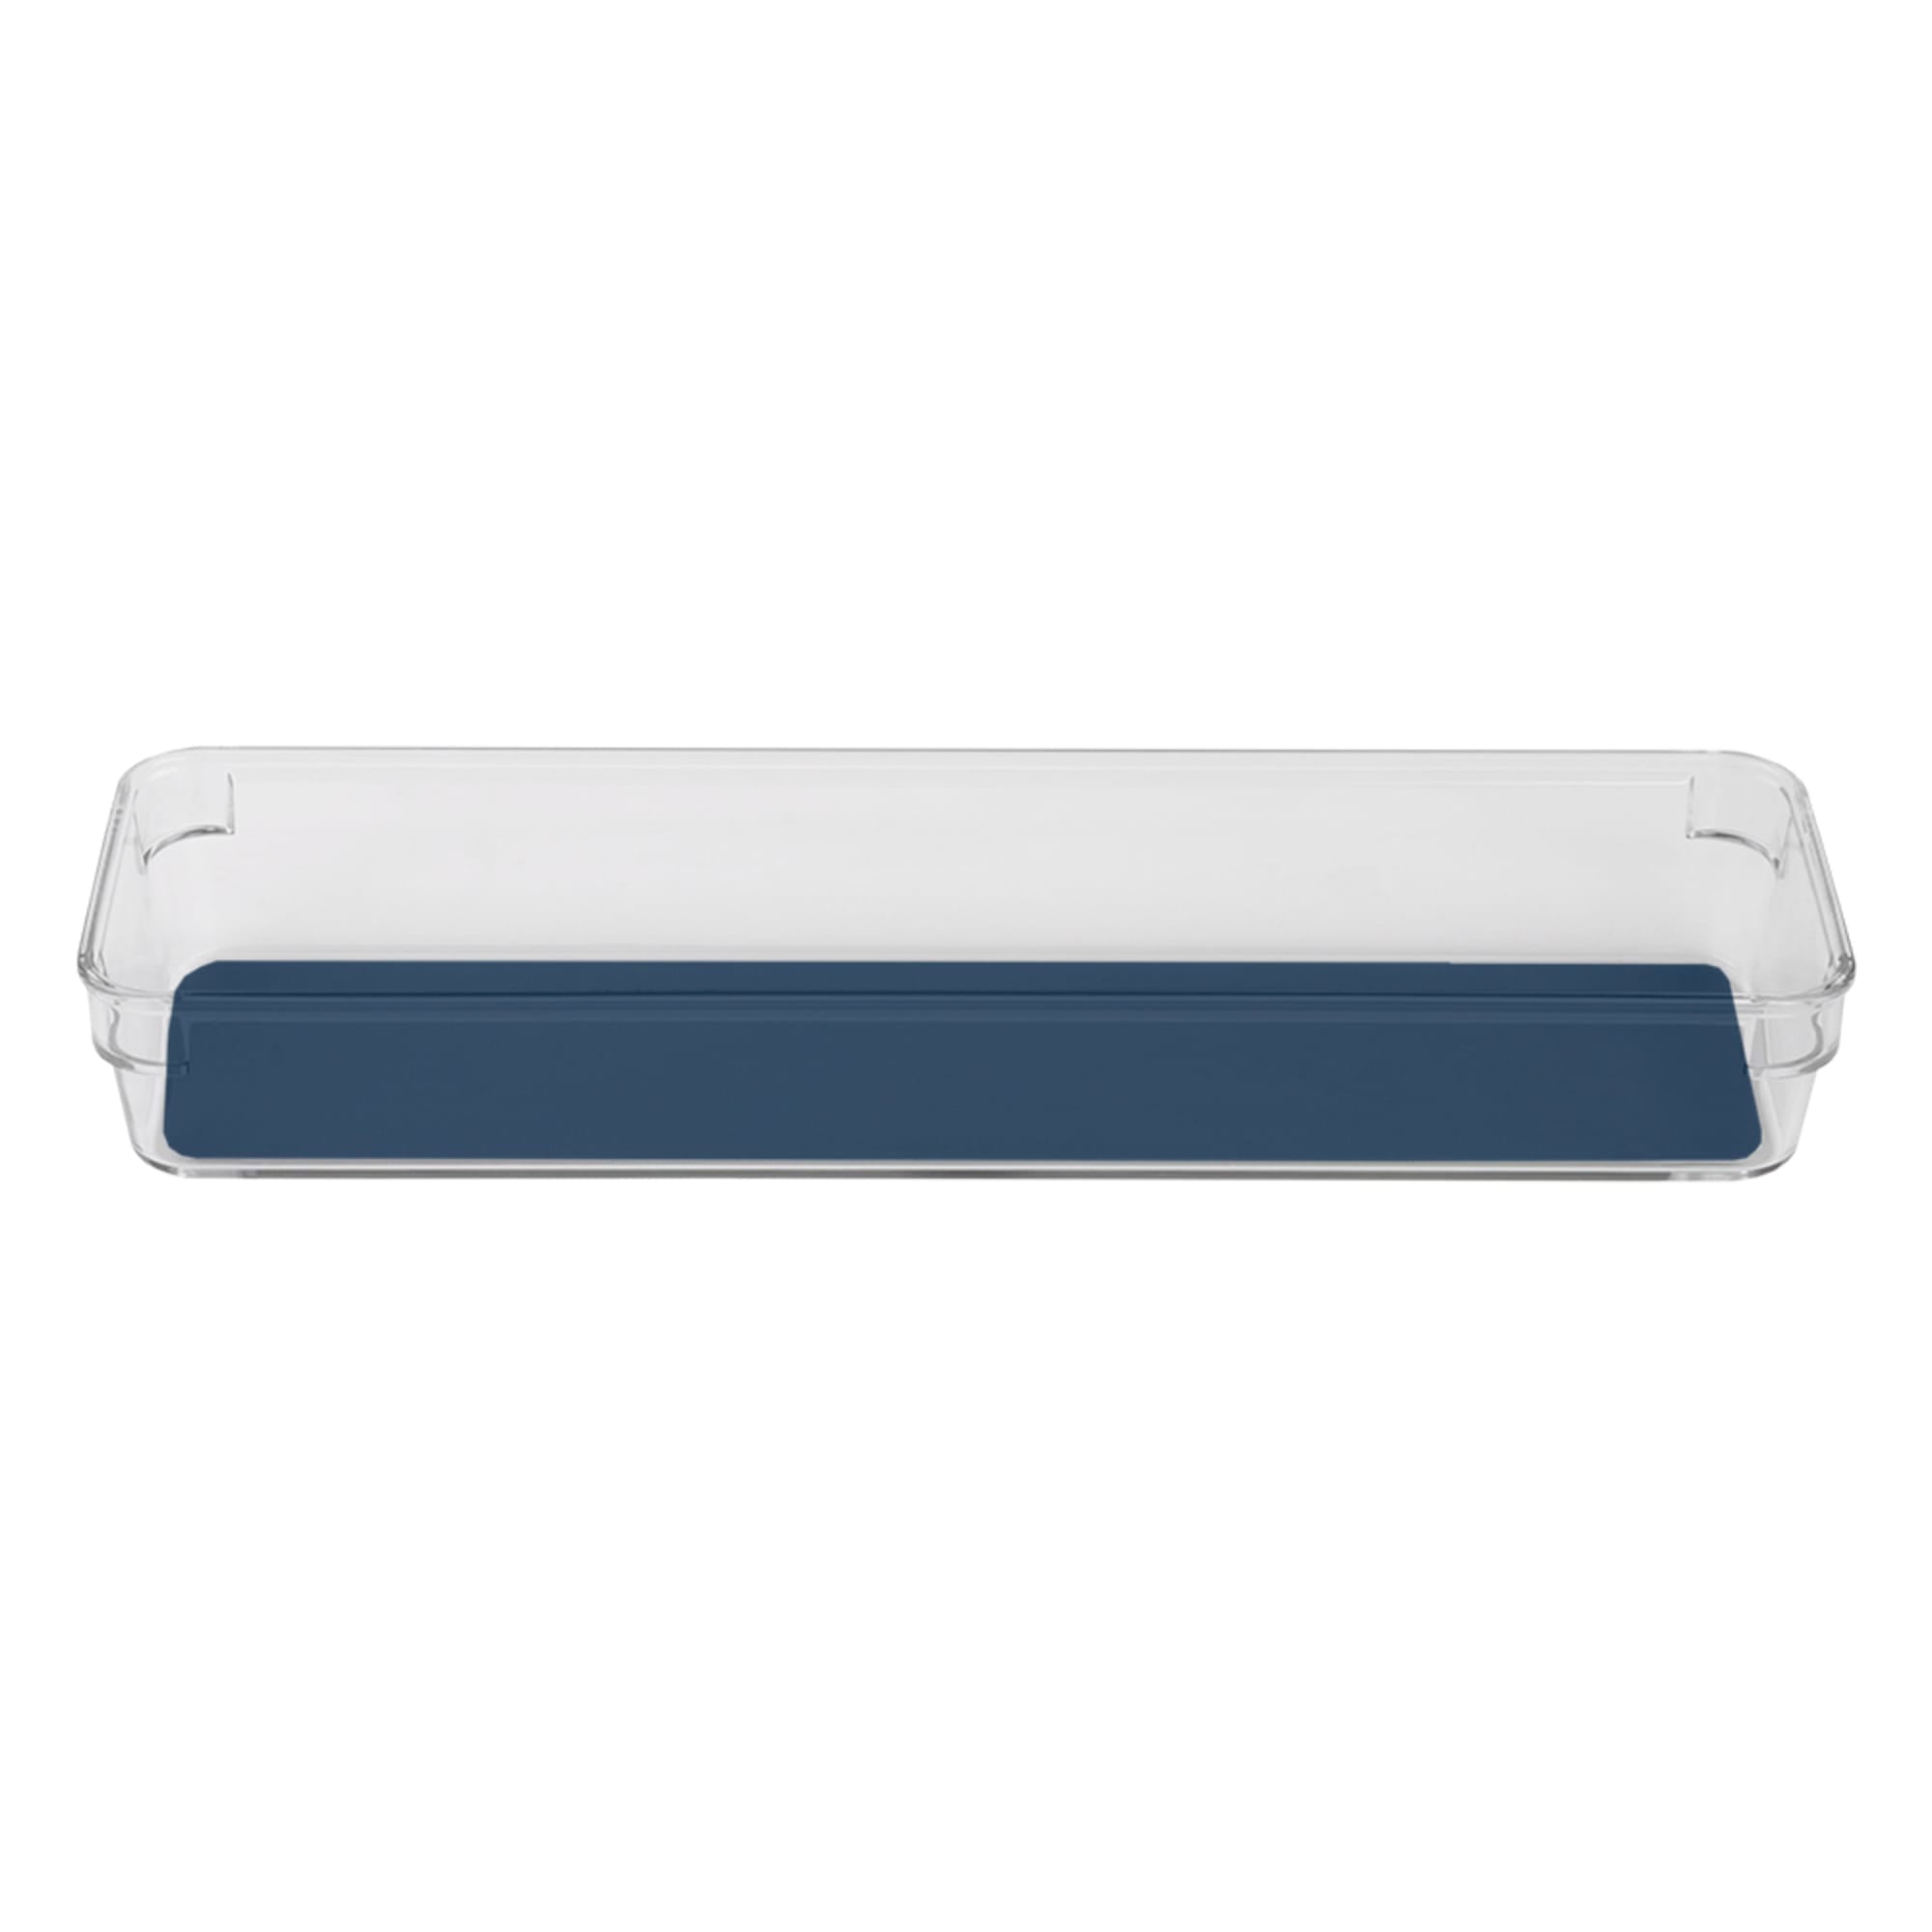 Michael Graves Design 12.75" x 3.75" Drawer Organizer with Indigo Rubber Lining $3.00 EACH, CASE PACK OF 24